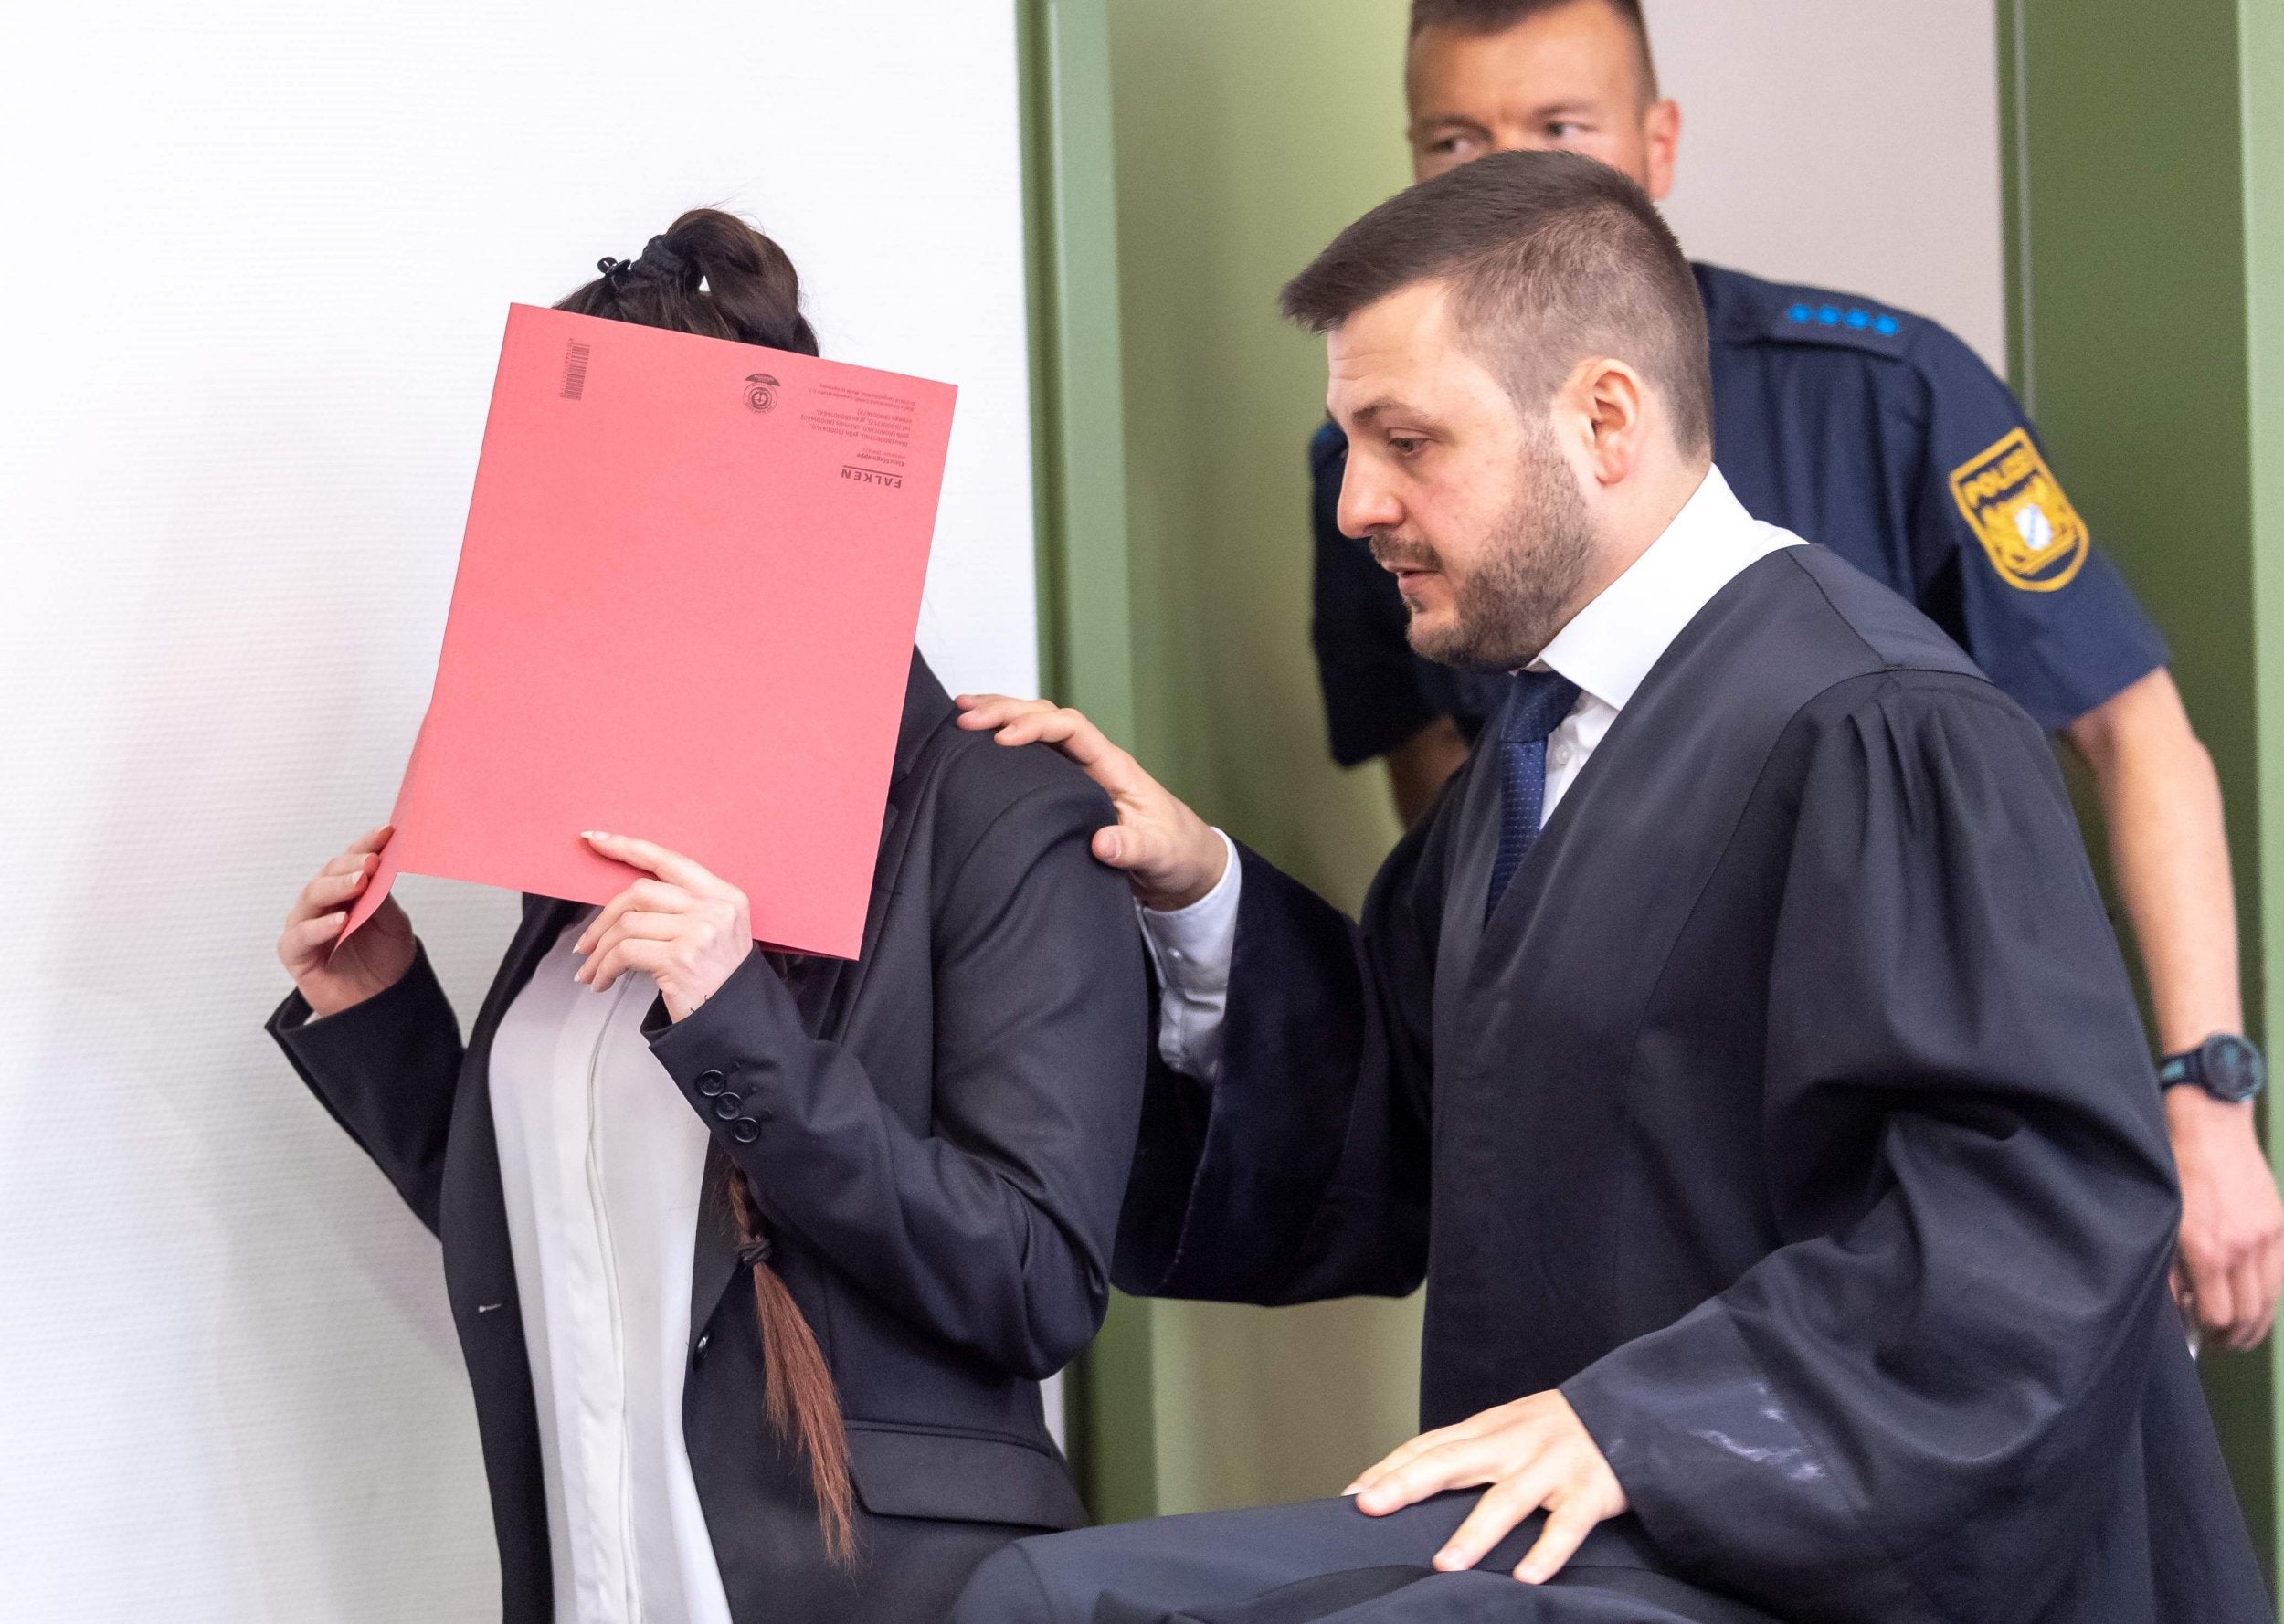 Defendant Jennifer W hides her face behind a folder and walks next to her lawyer Ali Aydin